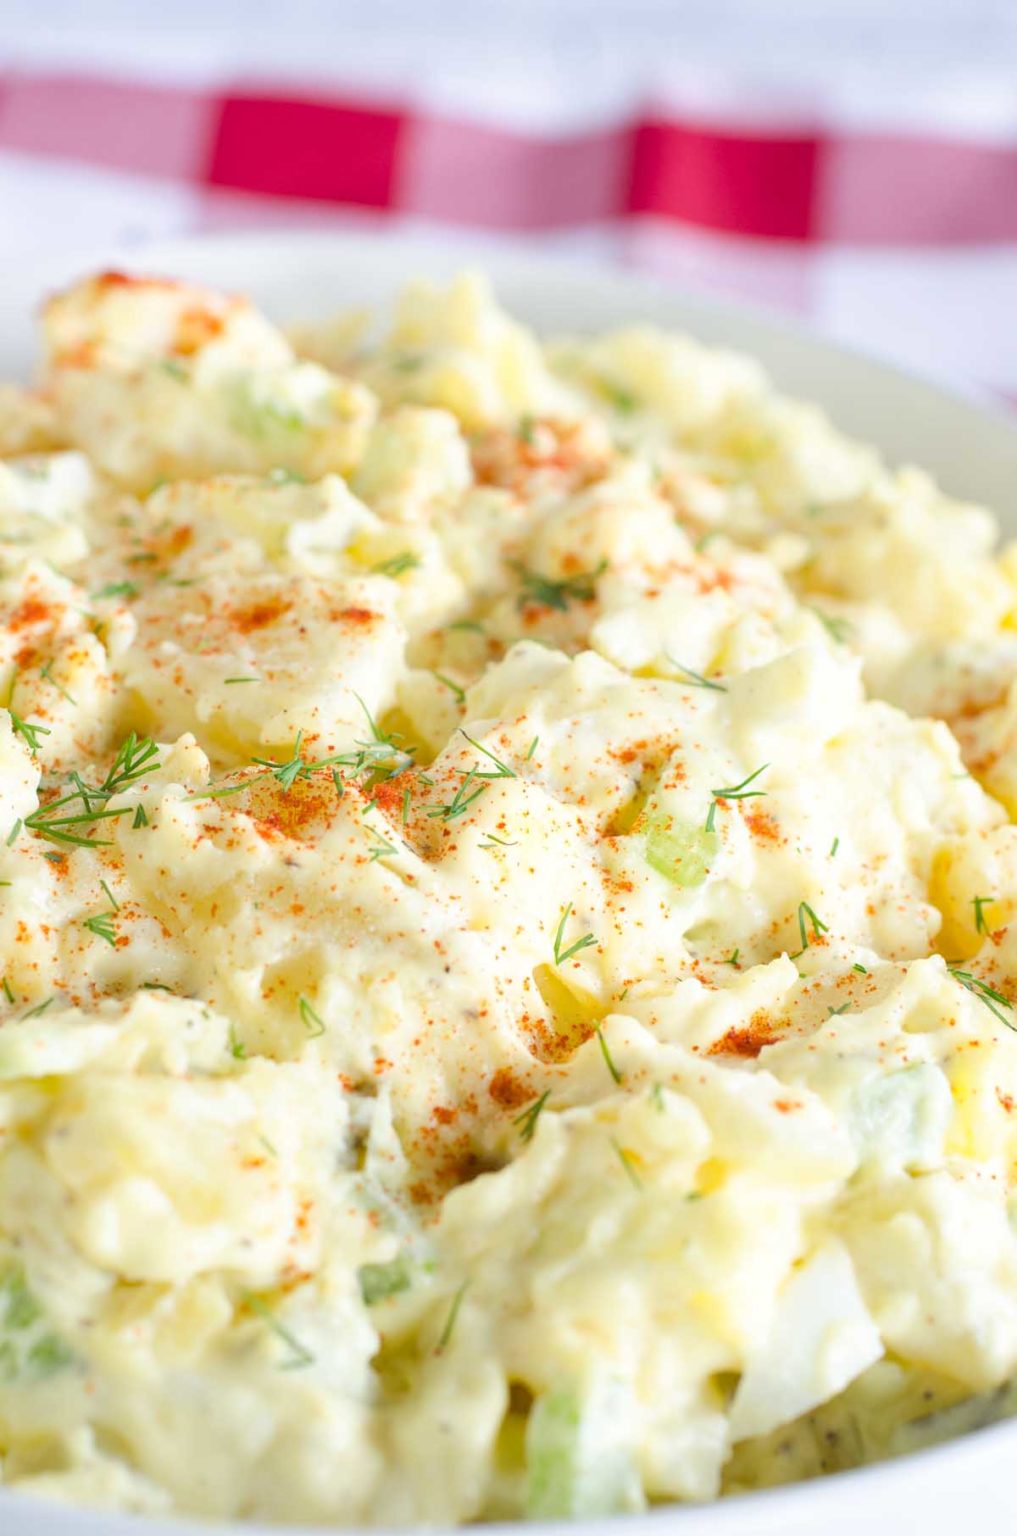 Best Potato Salad Recipe - Guess my secret ingredient! +HOW-TO VIDEO